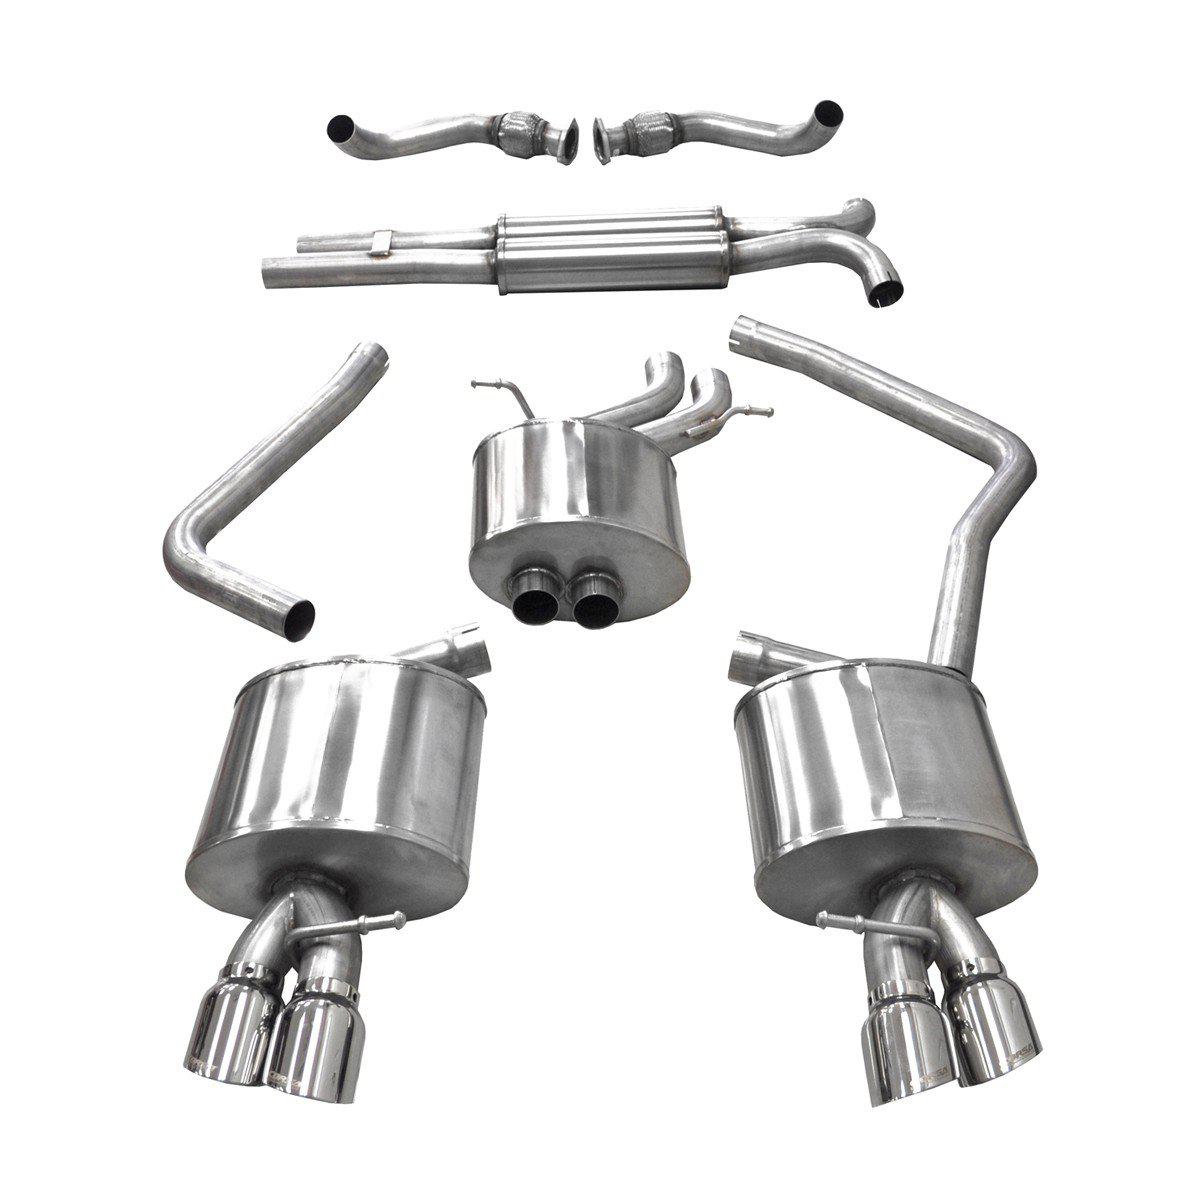 Corsa Performance B8 Audi S4/S5 3.0t Cat-Back Exhaust System-A Little Tuning Co